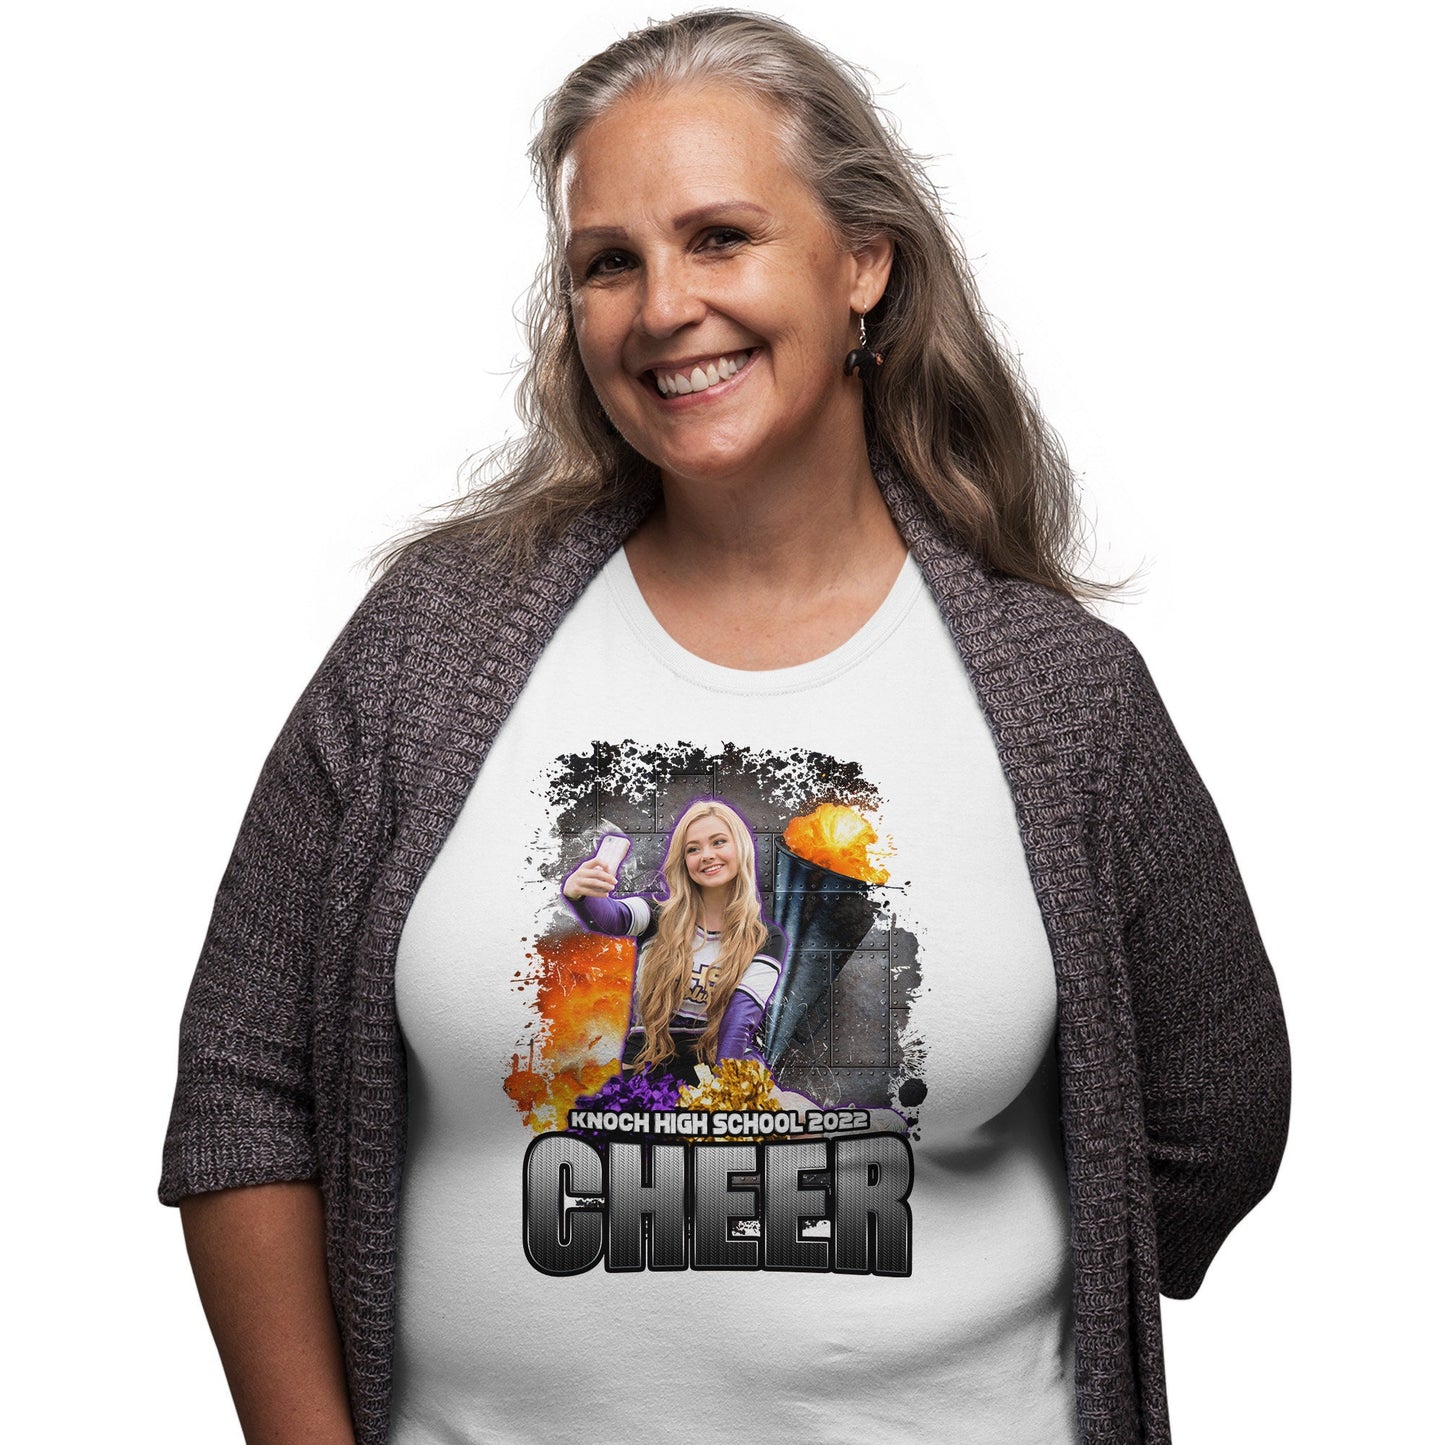 Personalized Cheerleader Picture T-Shirt for Mom Dad Brother Sister Aunt Senior Cheerleading Photo Shirt Perfect for Game Day Sizes XS-5XL